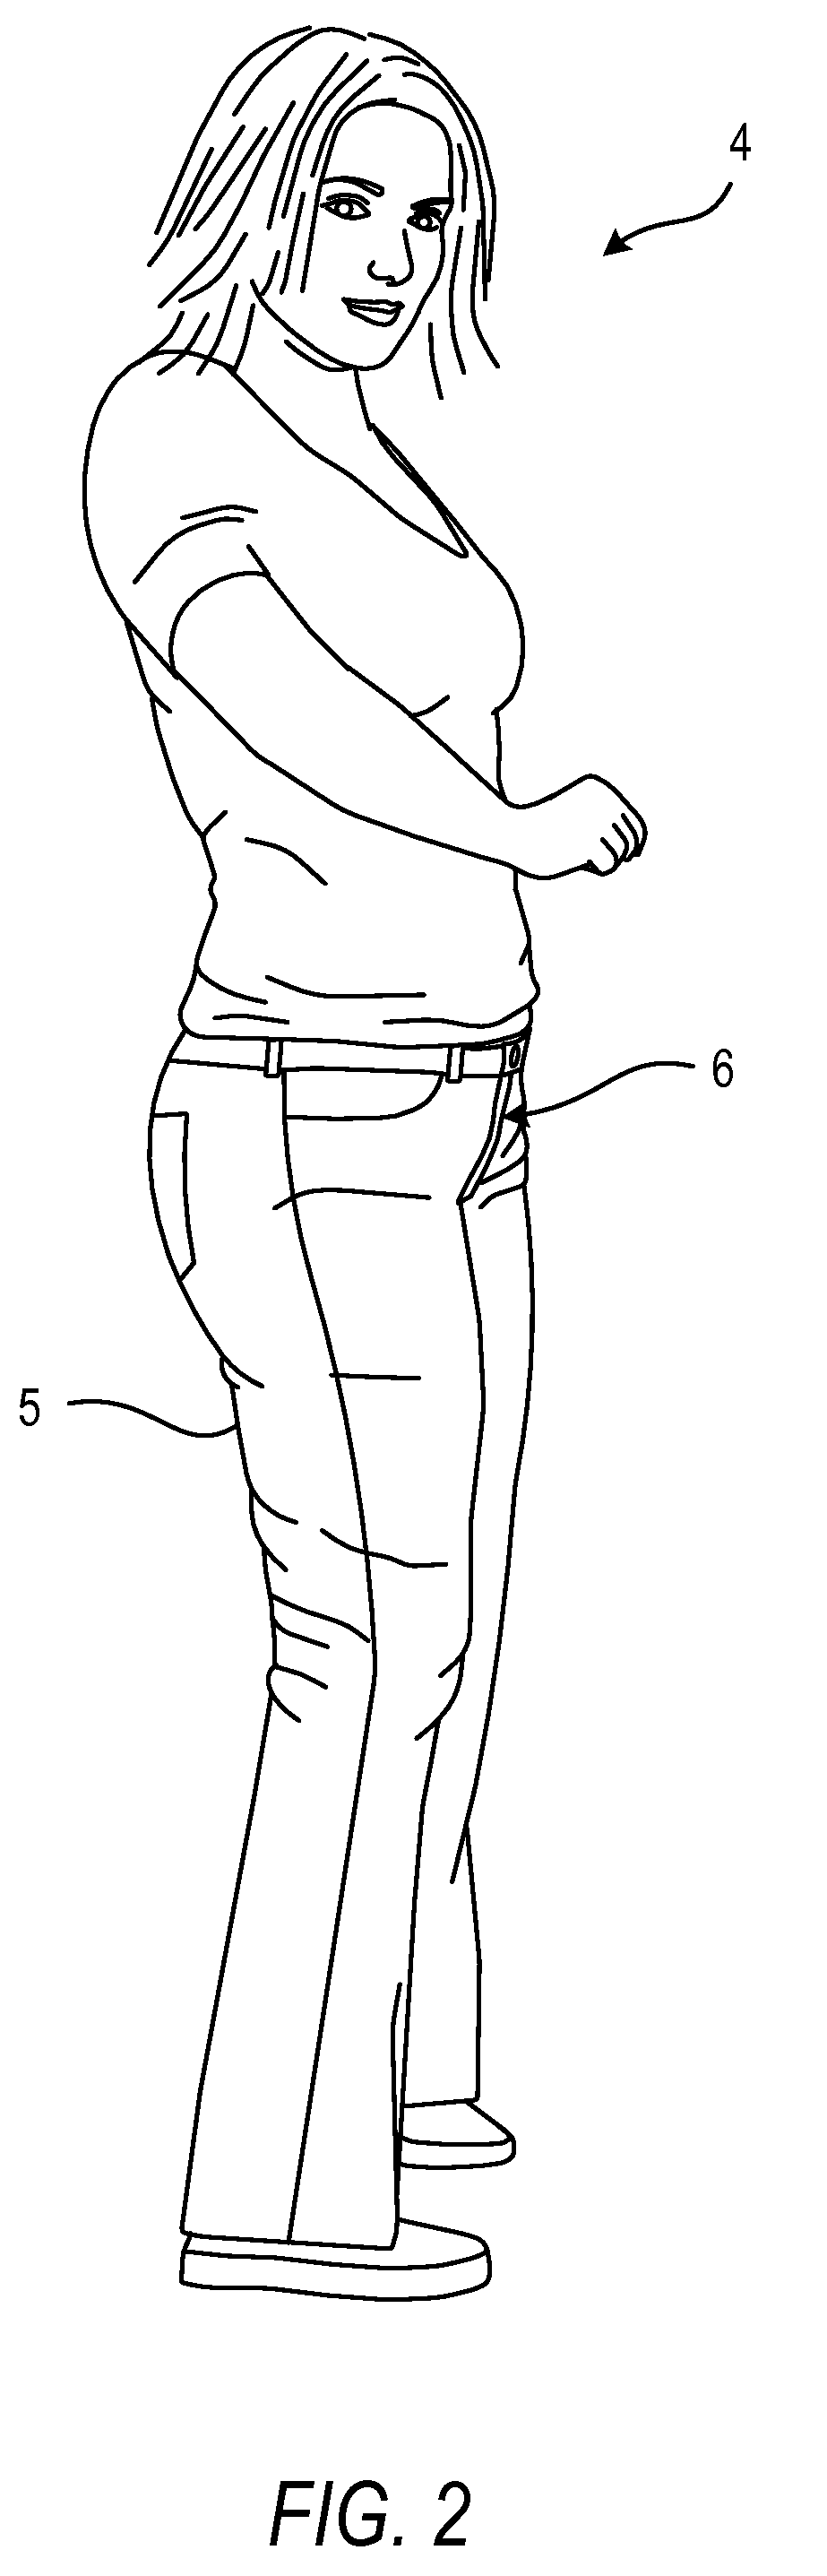 Pants for Improved Body Shape